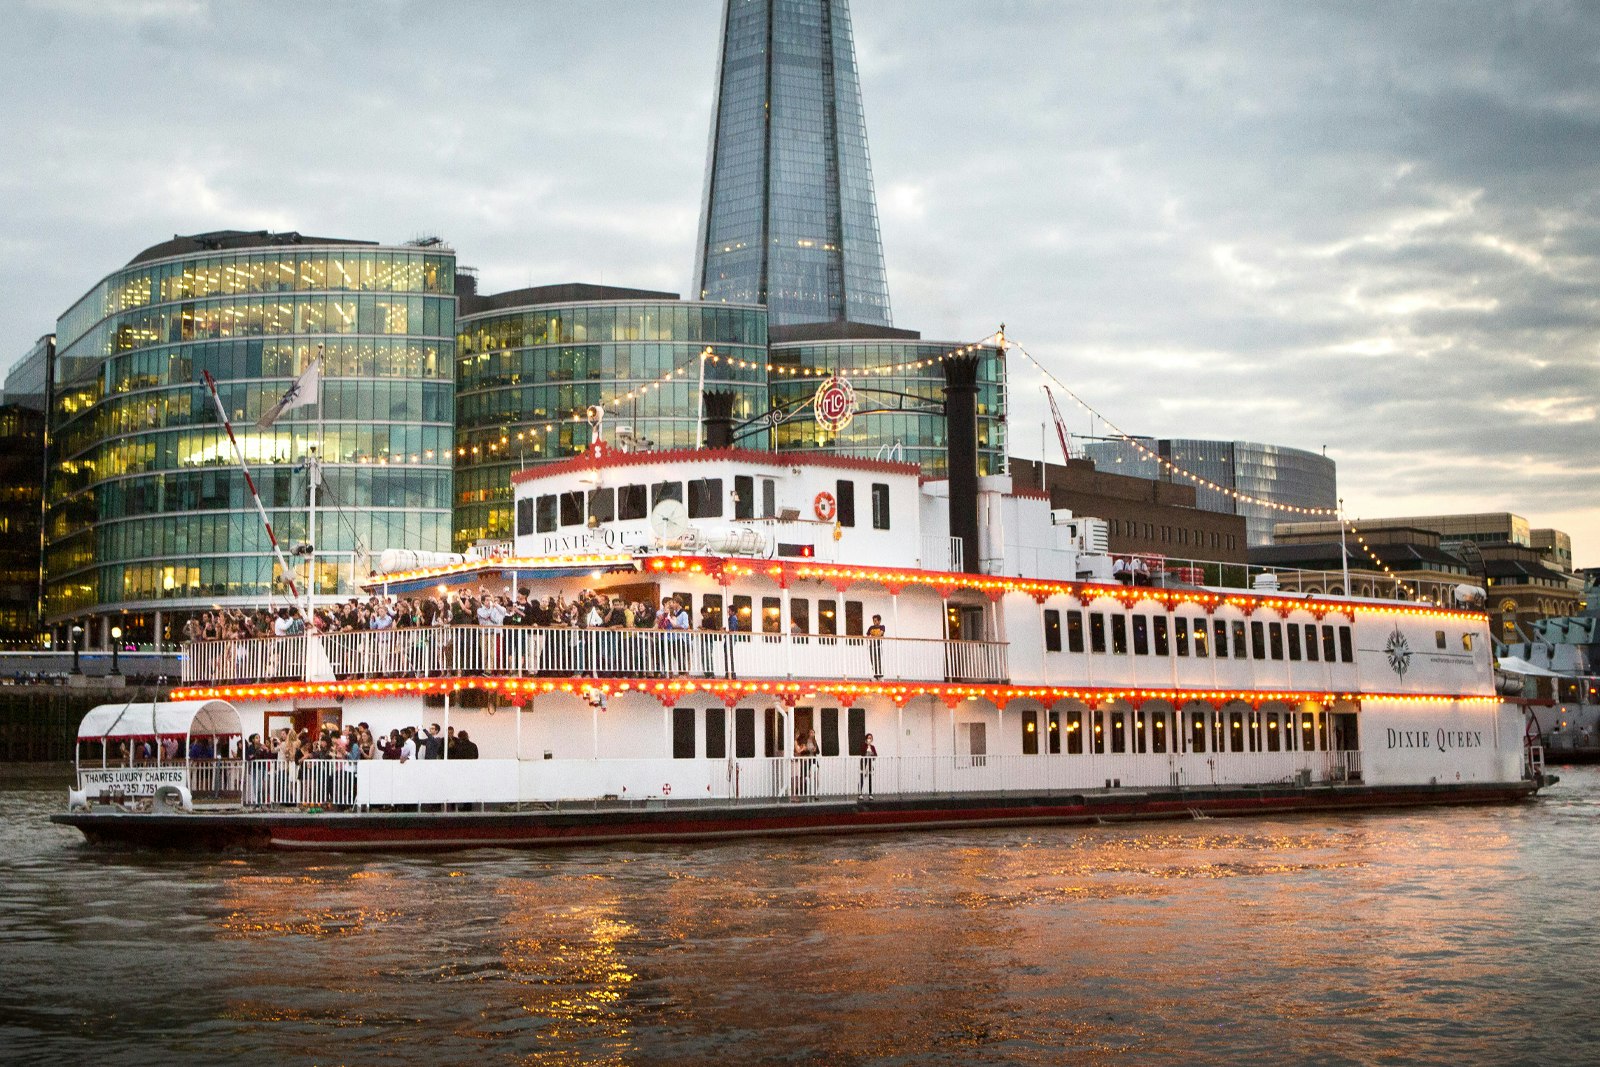 Boats Venues in London - Dixie Queen